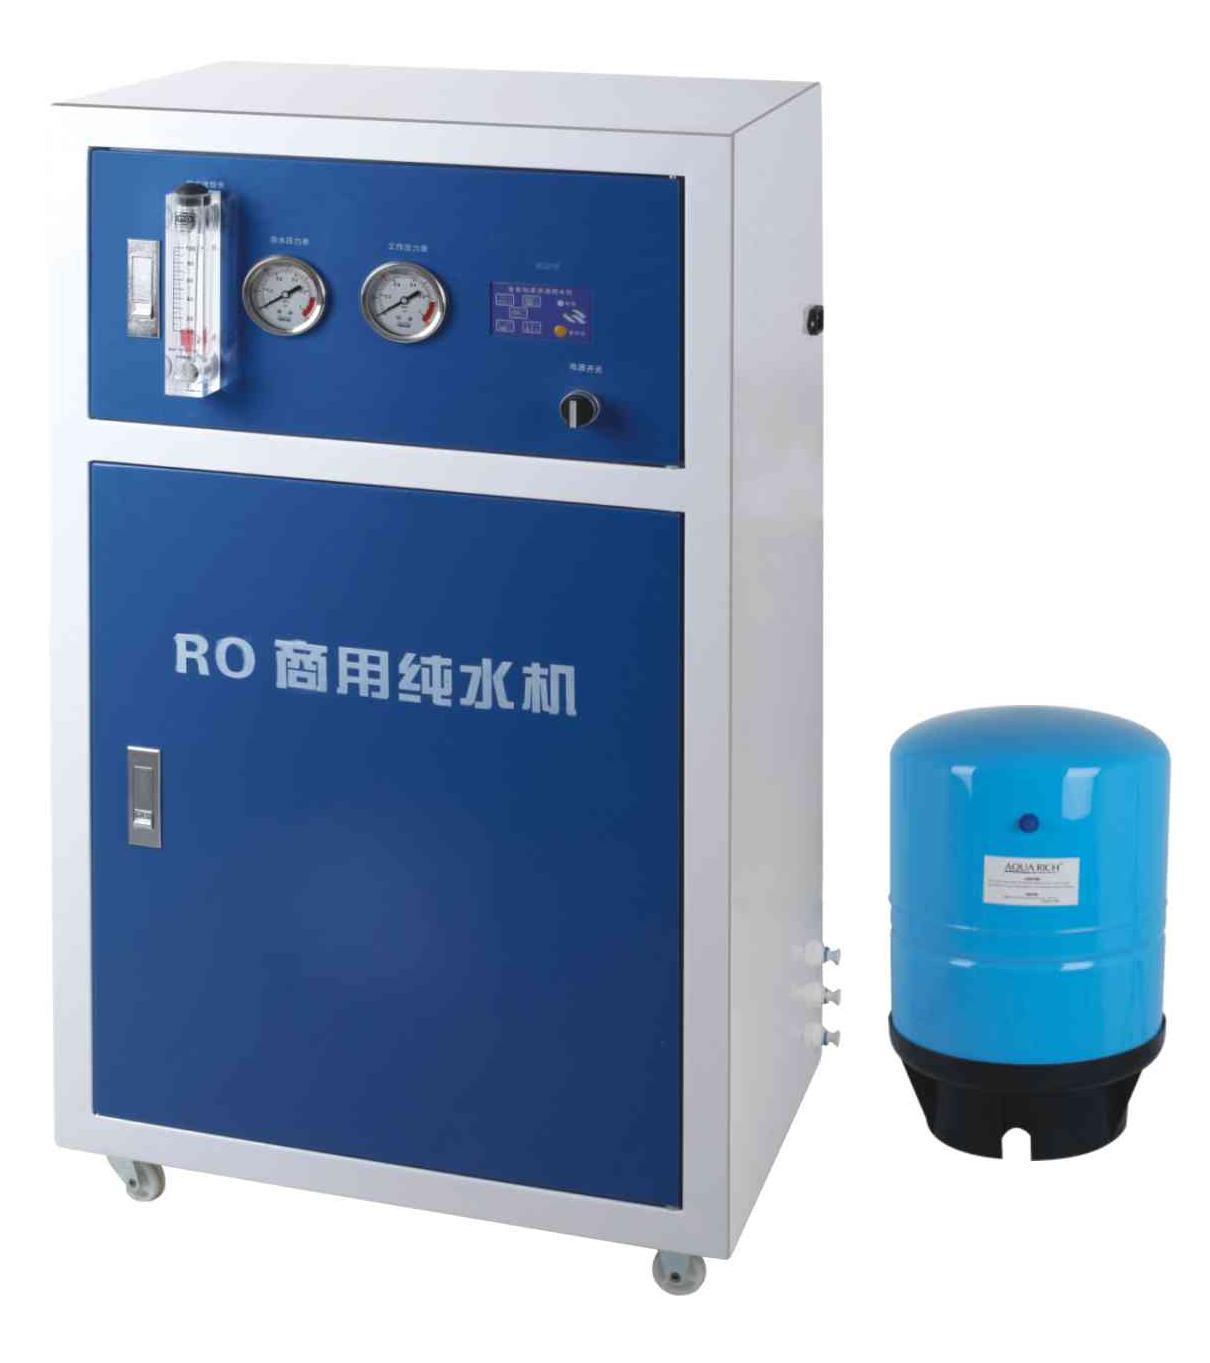  Commercial RO Water Filter C Manufactures